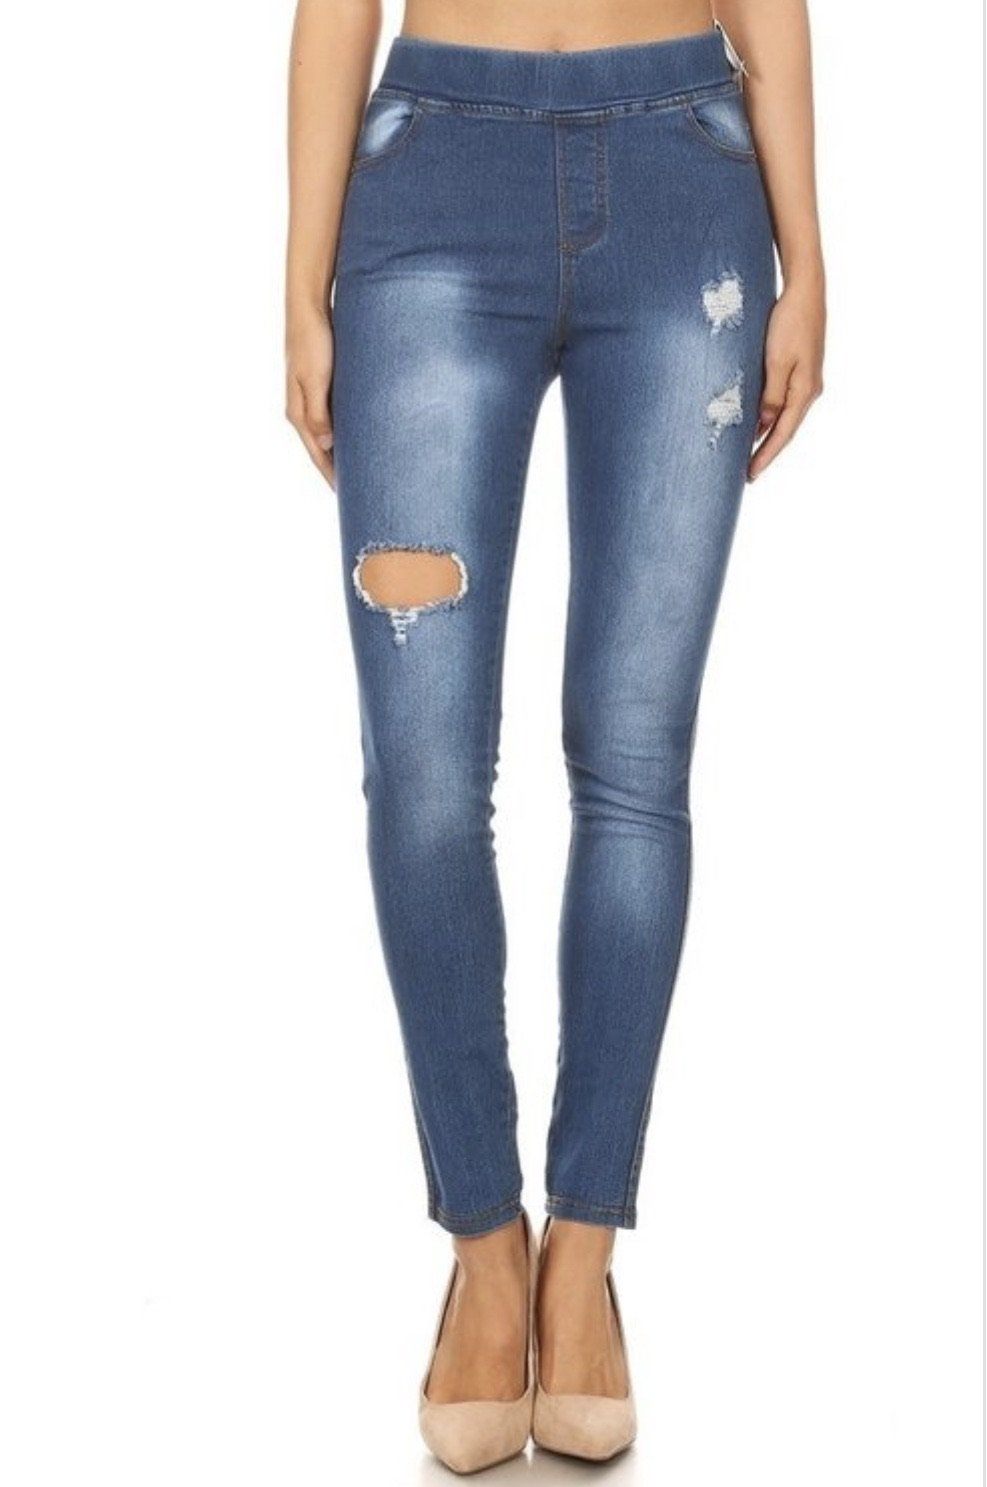 Ripped Jeans For Women and Juniors